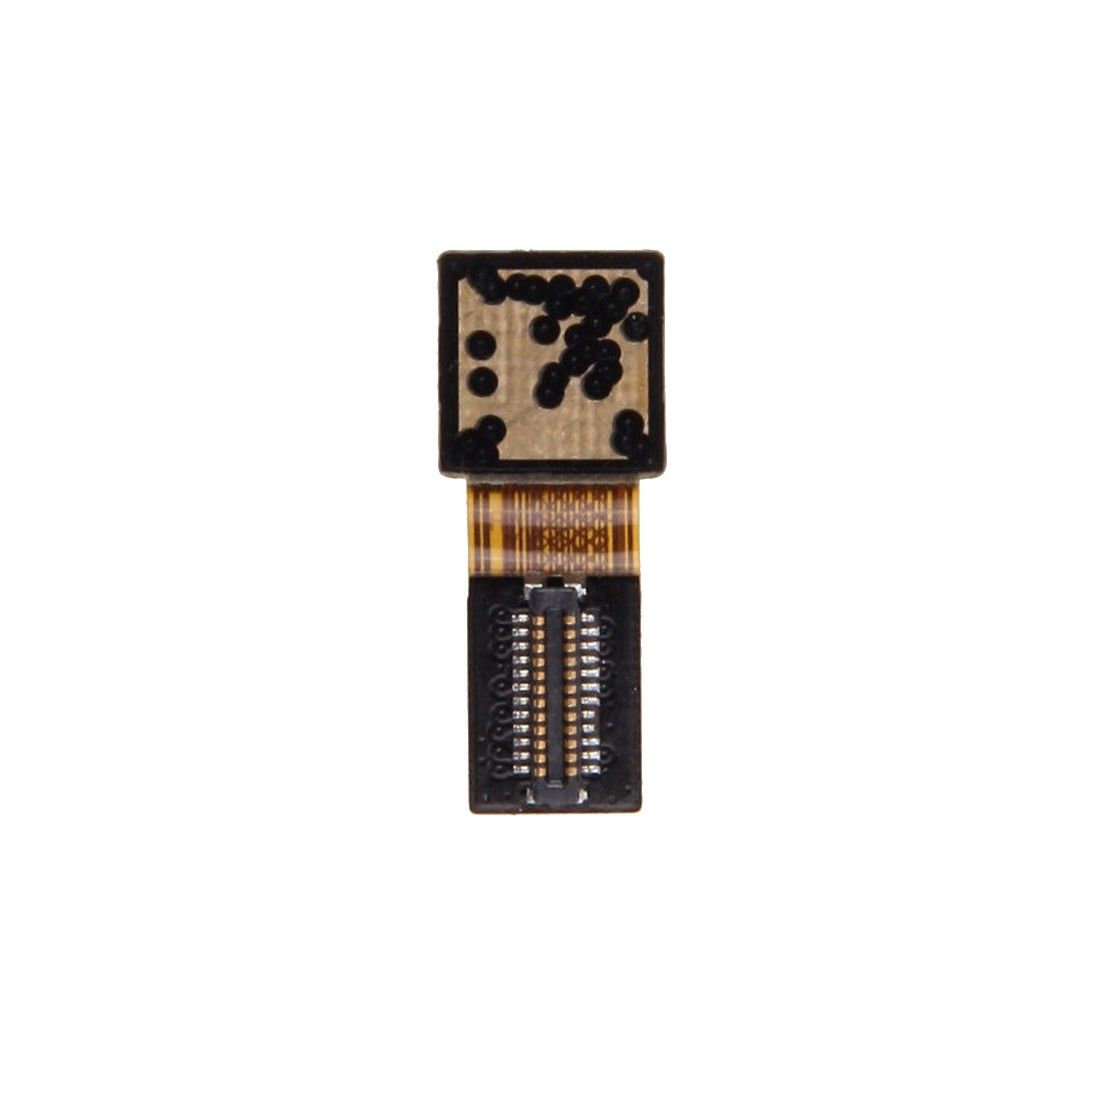 Huawei P8 Lite Front Camera Module for [product_price] - First Help Tech